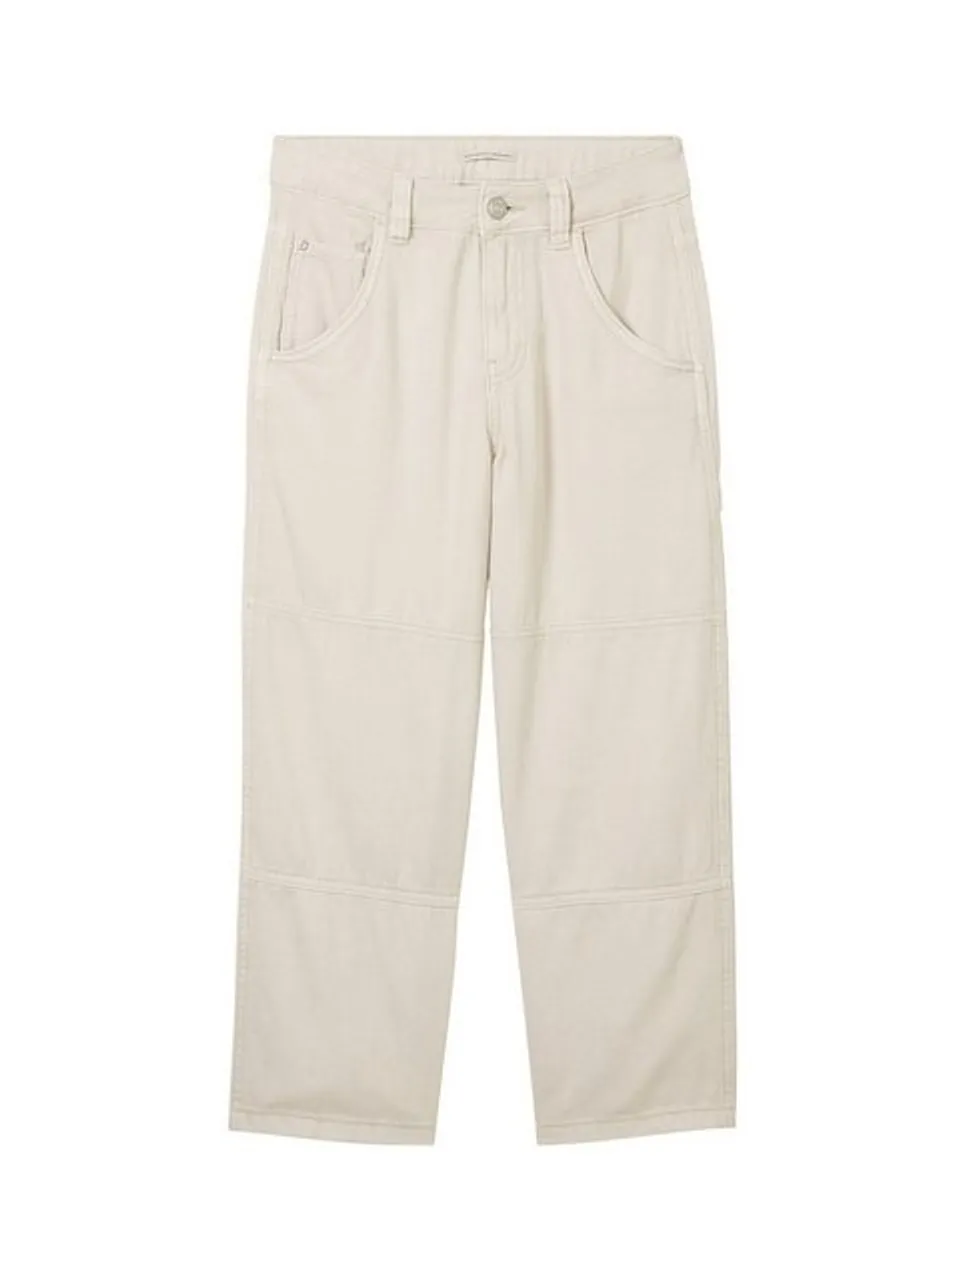 TOM TAILOR Chinohose Baggy Hose mit recycelter Baumwolle